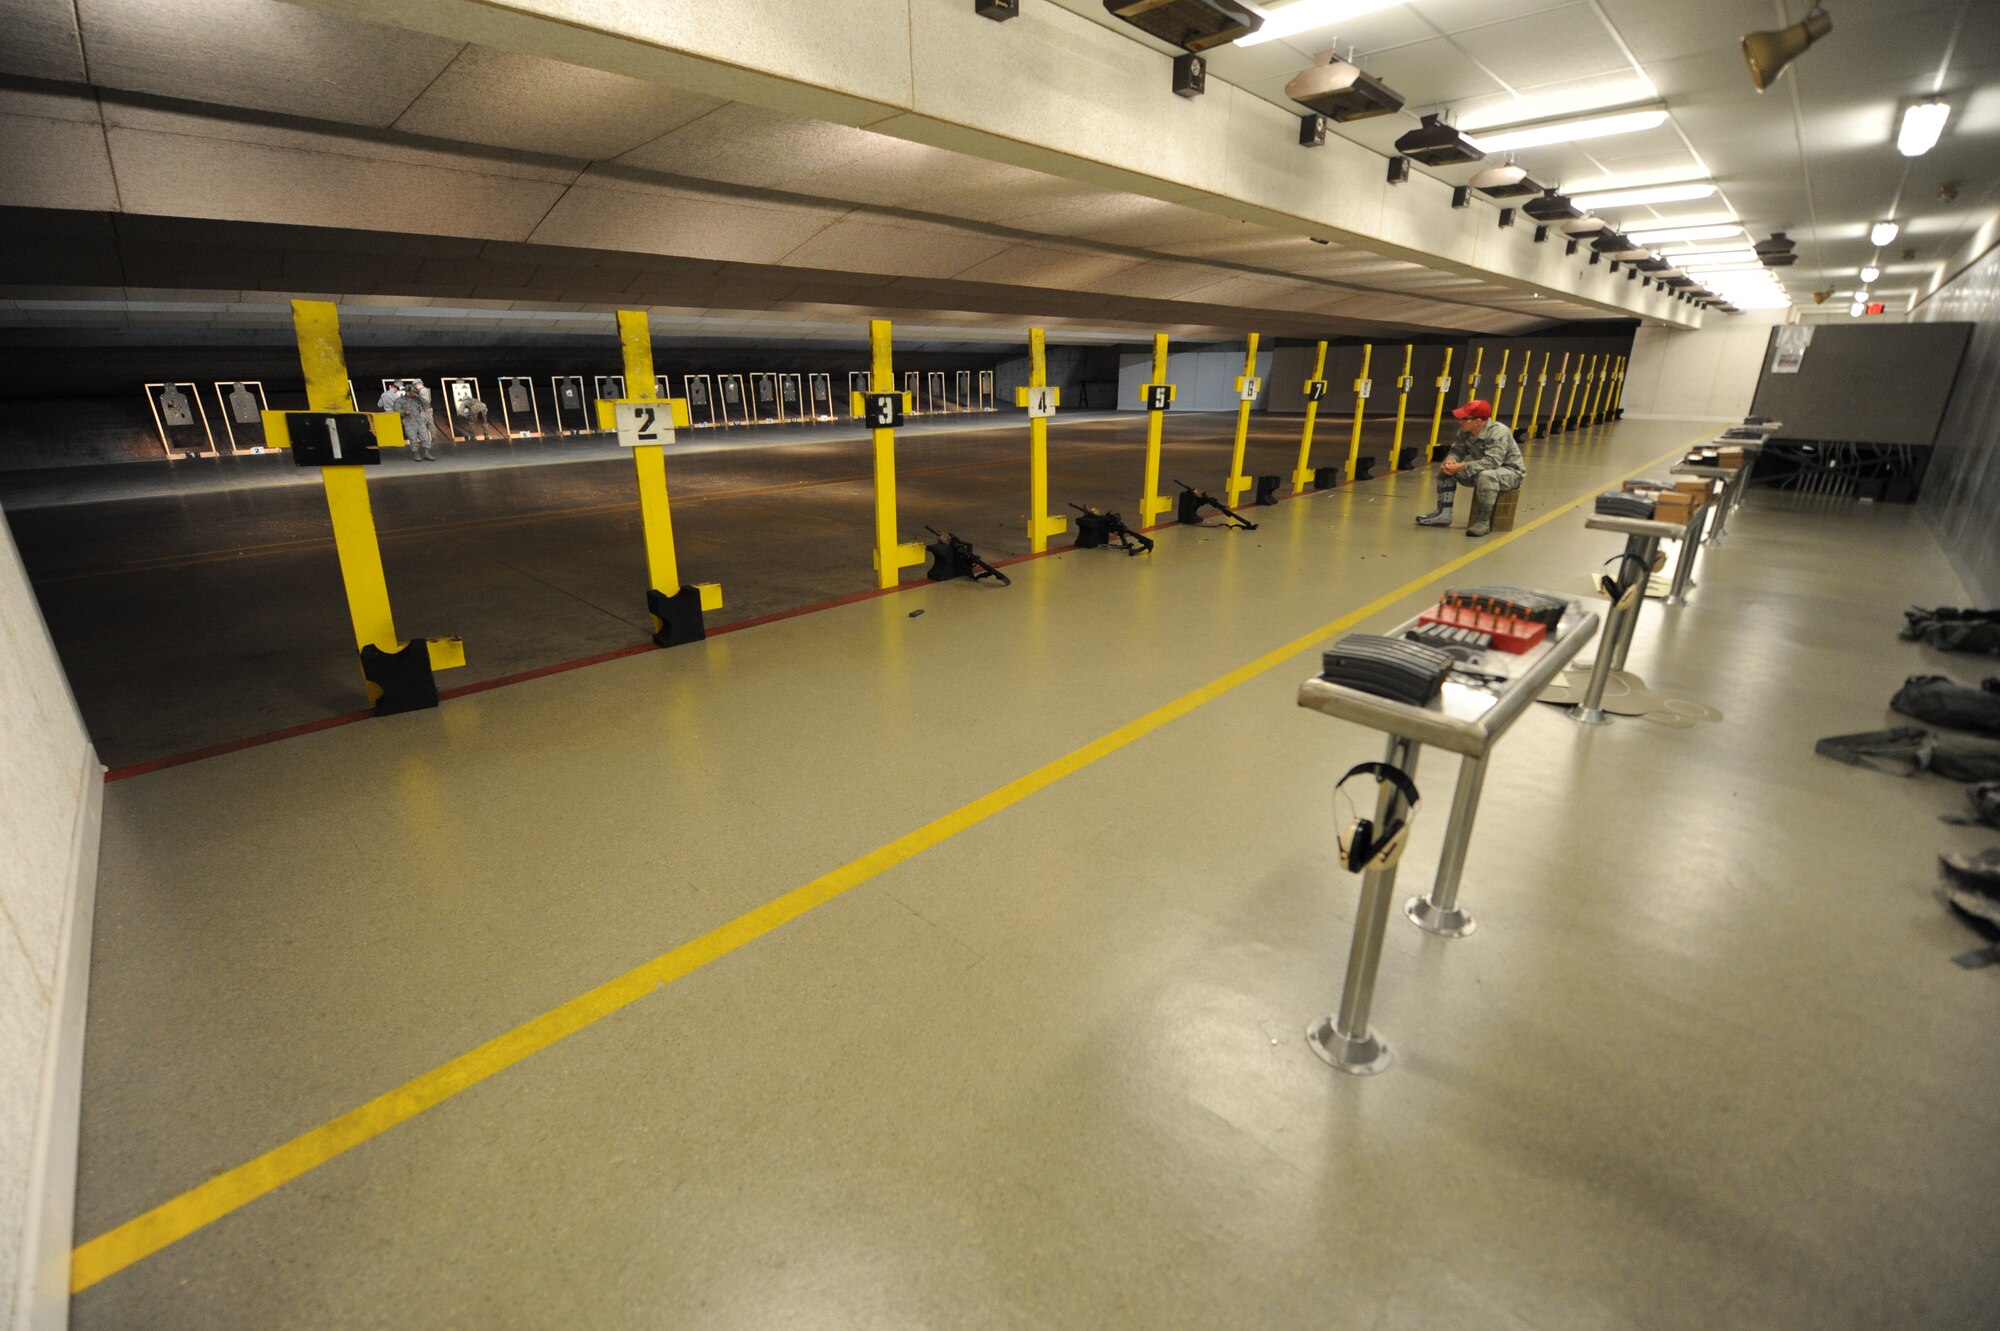 Ellsworth’s combat arms range is an indoor facility used for firearms training at Ellsworth Air Force Base, S.D., Oct. 13, 2015. Personnel eligible for CA courses include deployers and those with duty qualification requirements, such as explosive ordnance disposal teams, security forces personnel and members of Air Force Office of Special Investigations. (U.S. Air Force photo by Airman Sadie Colbert/Released)